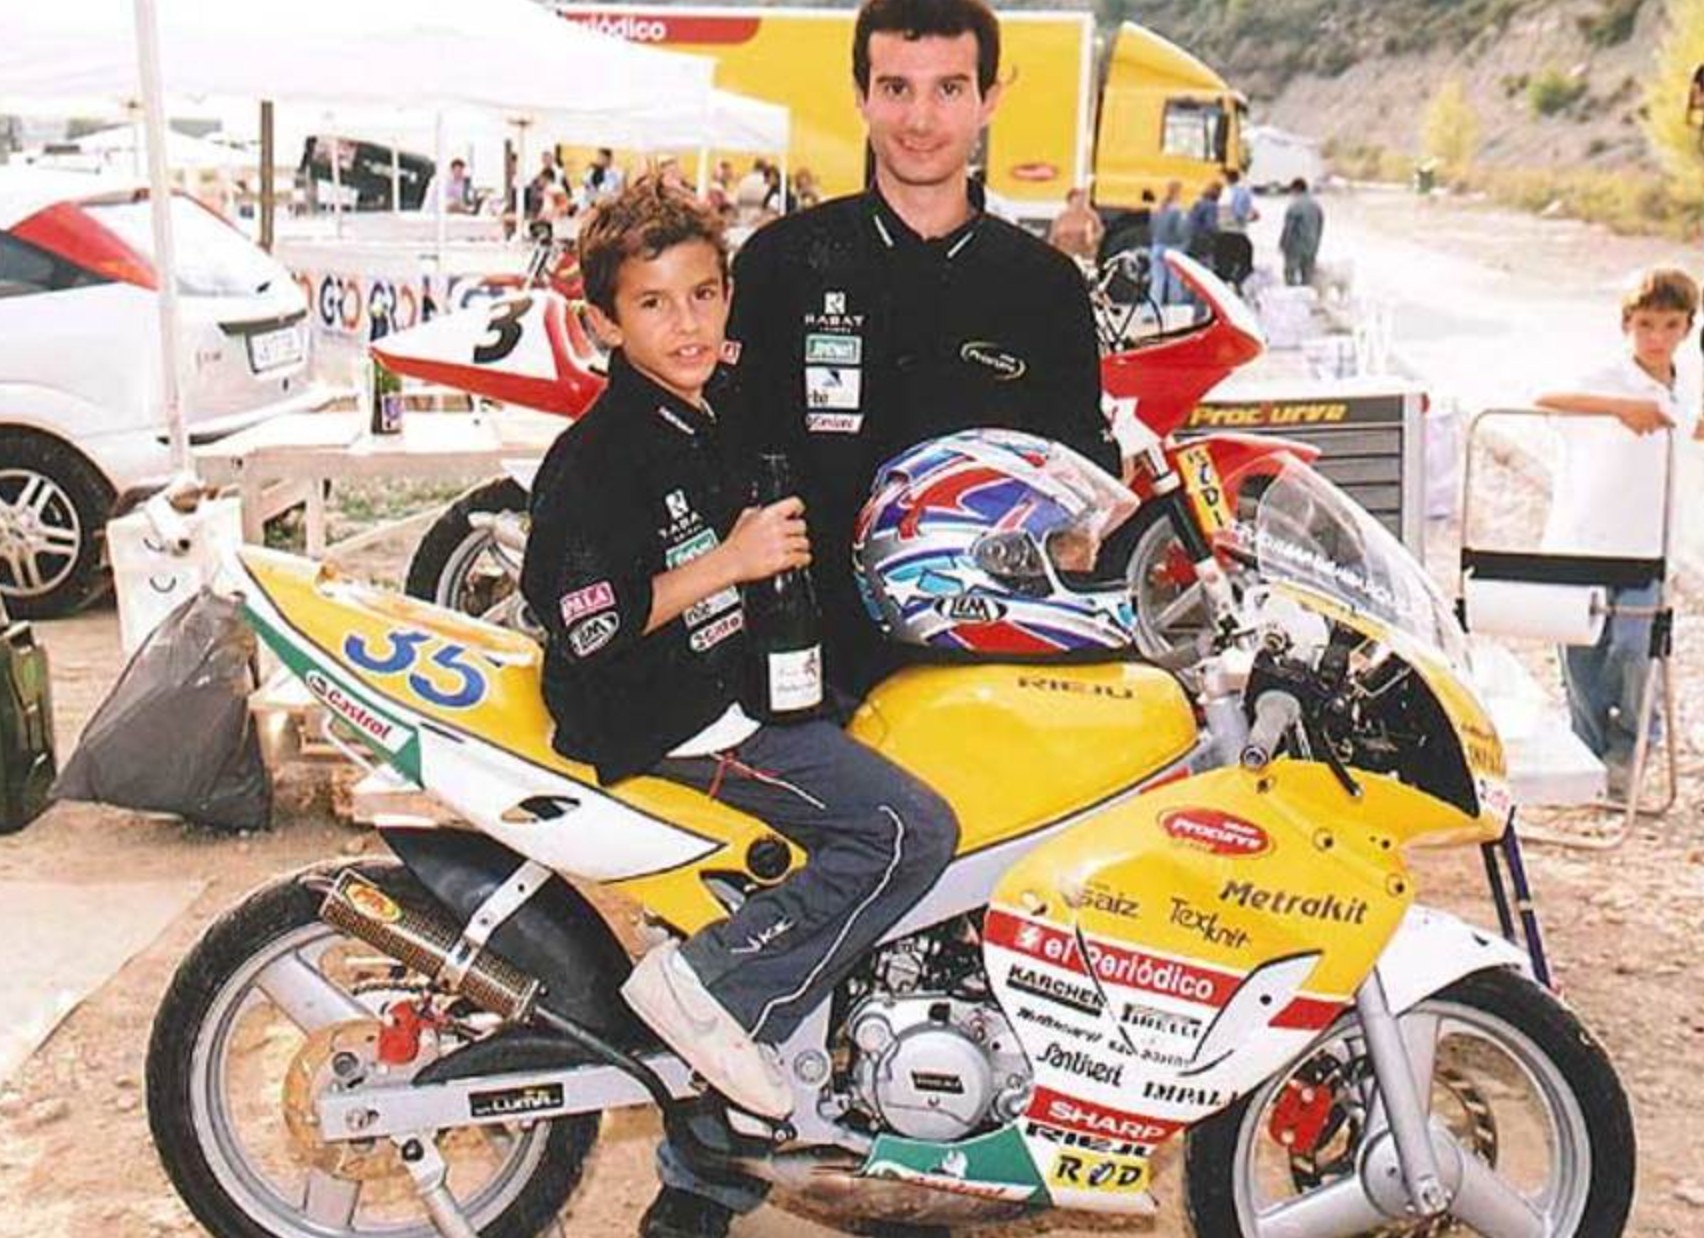 Time flies! Happy Birthday Marc Marquez... 28 today! This makes us feel old...       